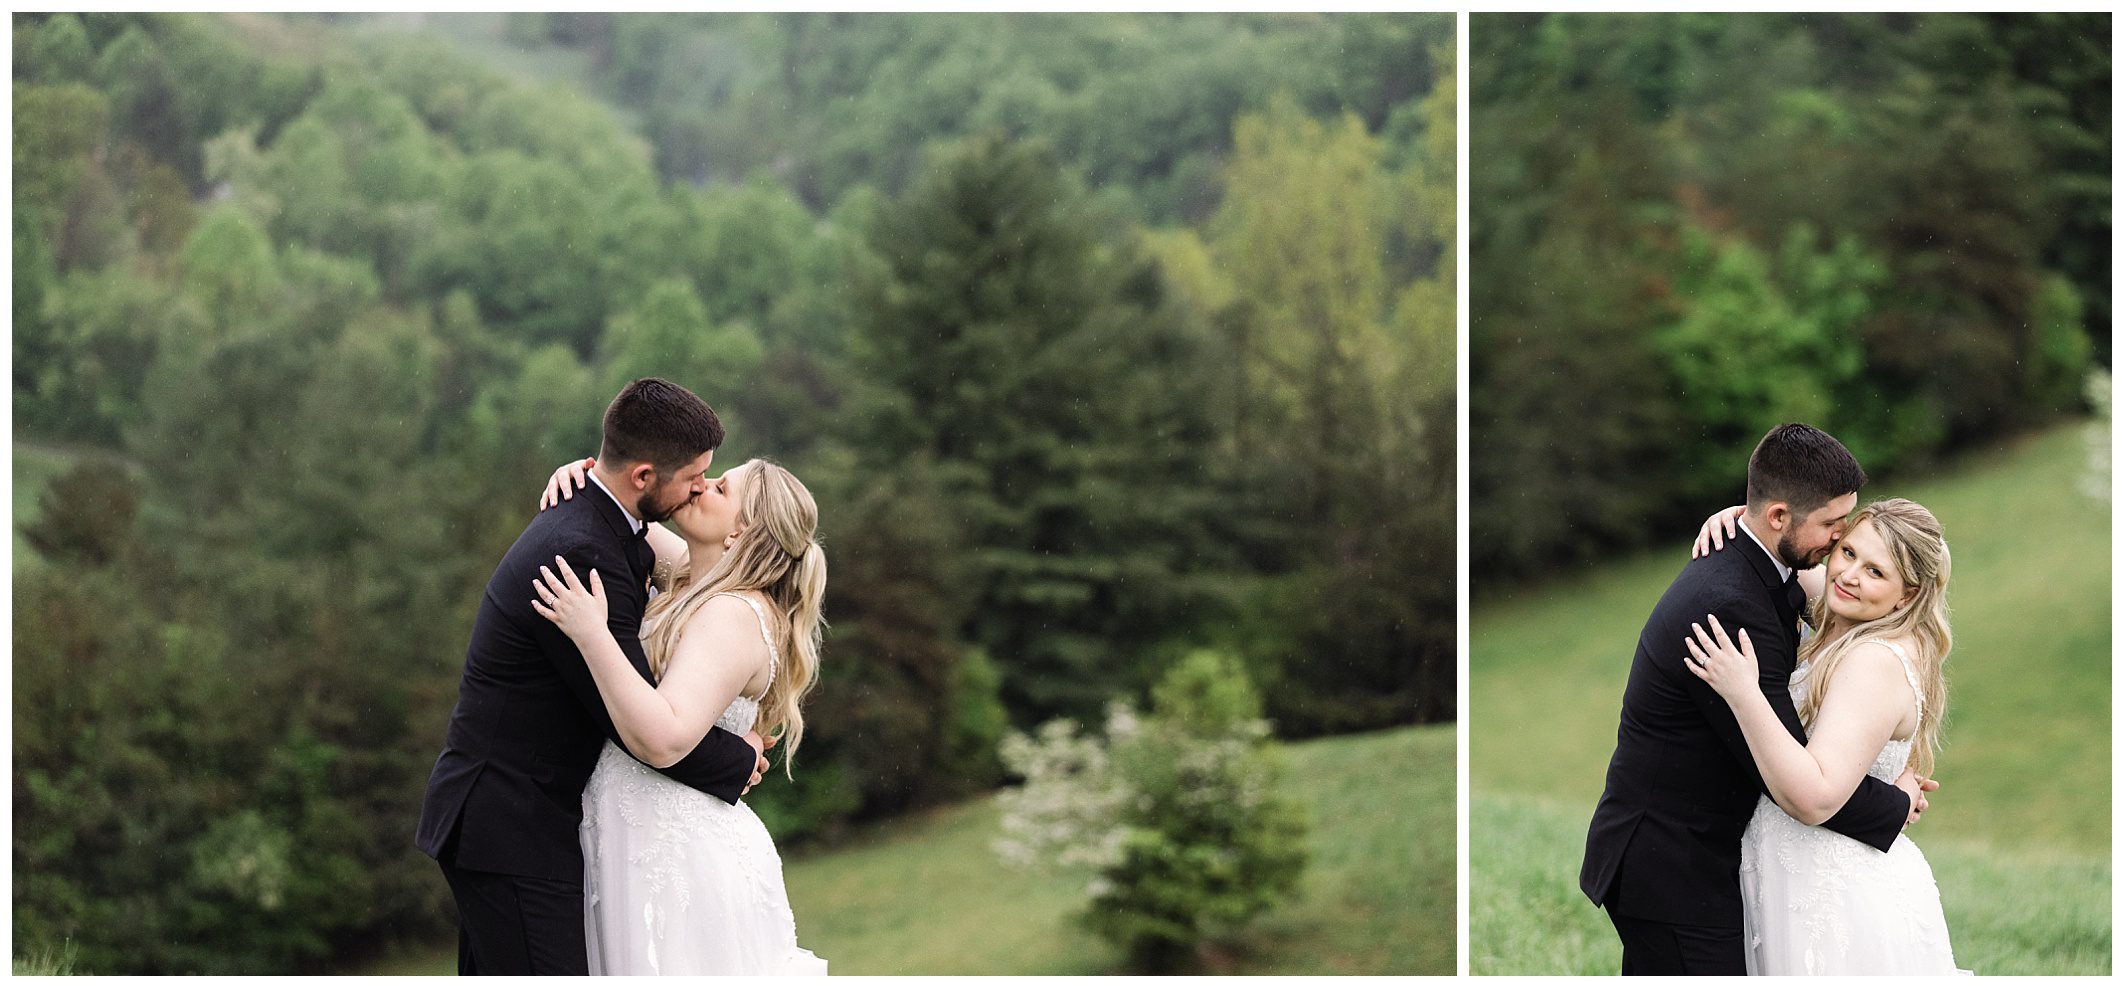 A couple in wedding attire embrace and kiss in a lush, green mountain landscape at Chestnut Ridge, with the second image showing them smiling and gazing at each other.